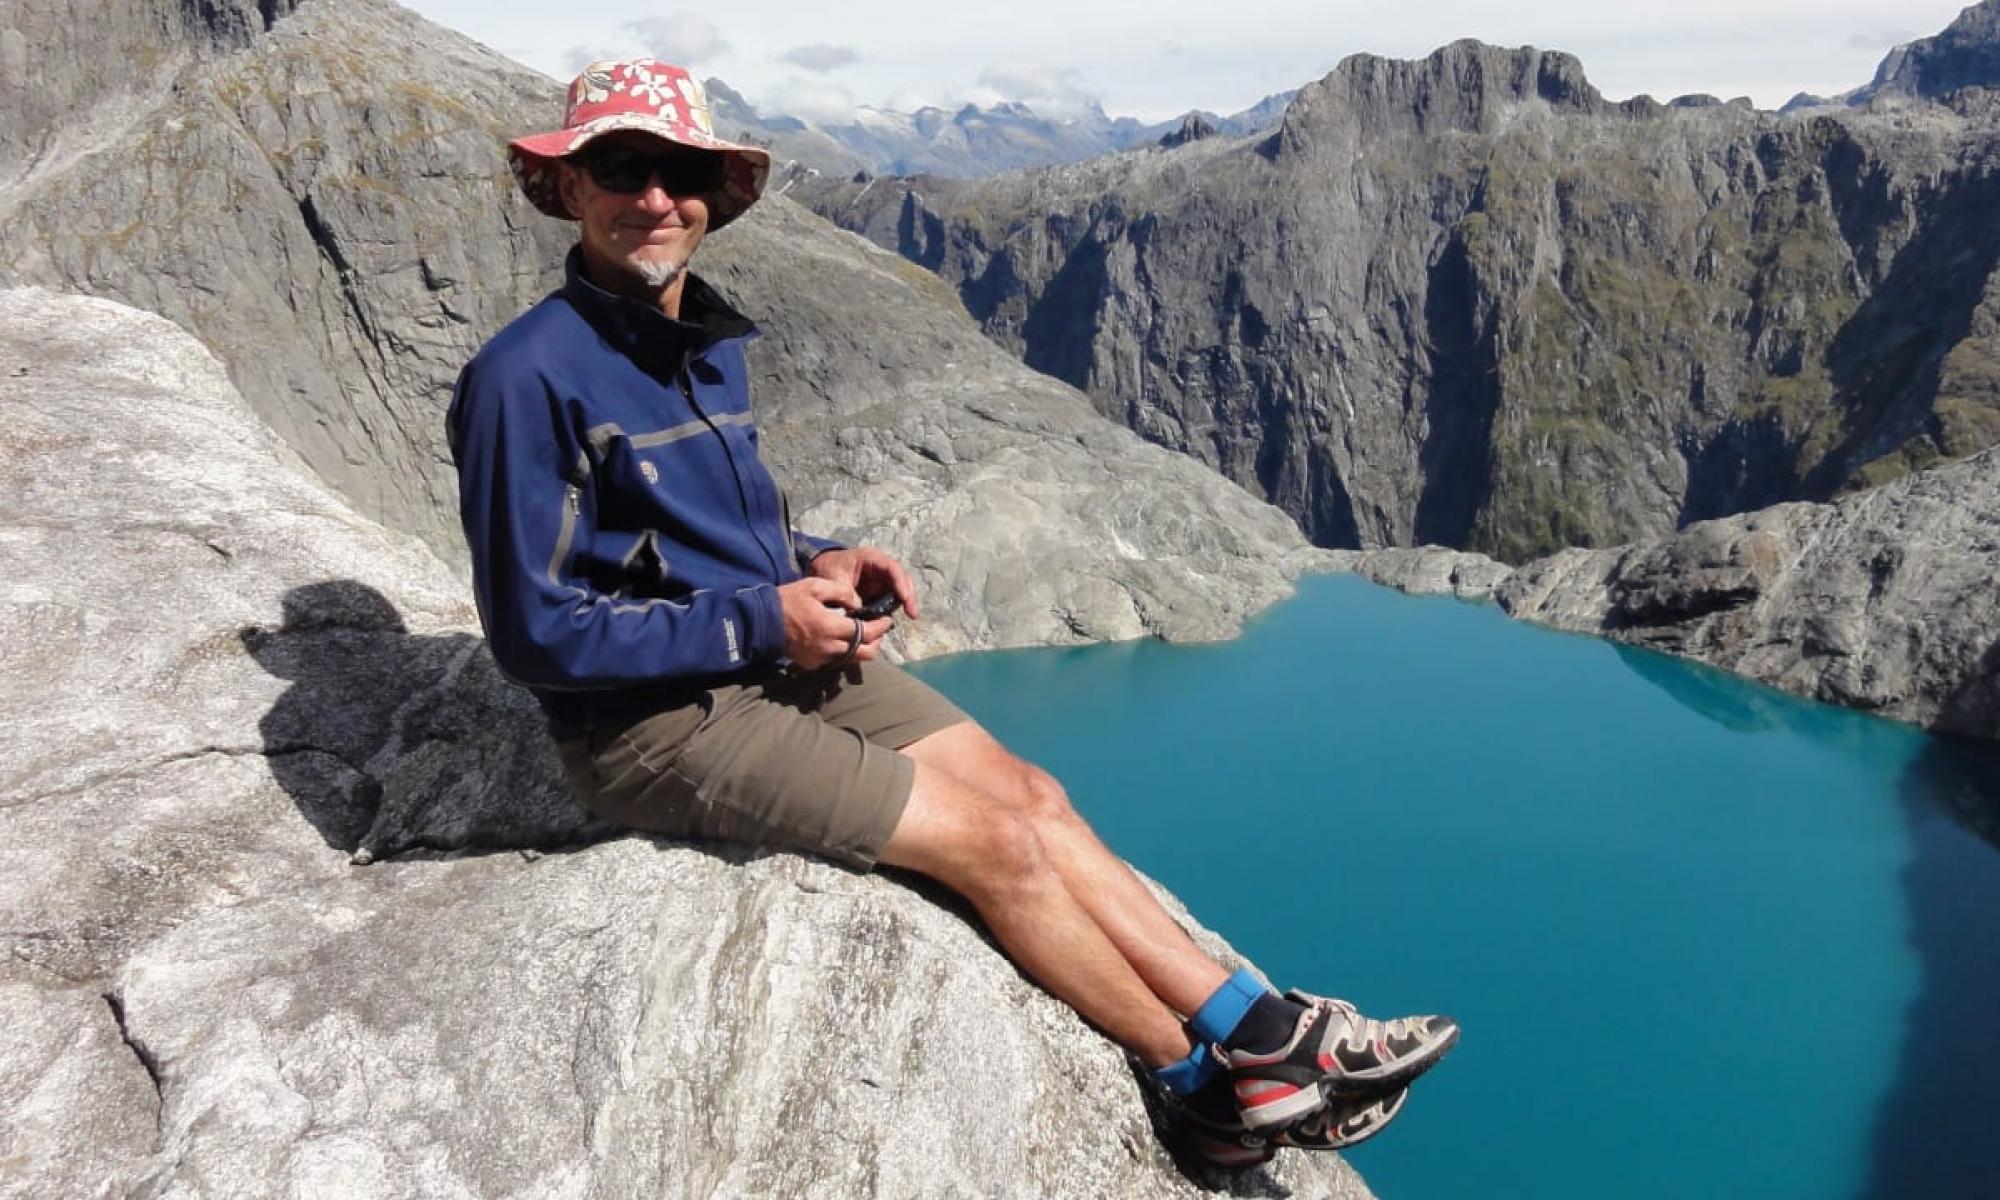 Photograph of Dave Vass wearing a blue jacket, brown shorts and a hat, while sitting on a rocky mountain.